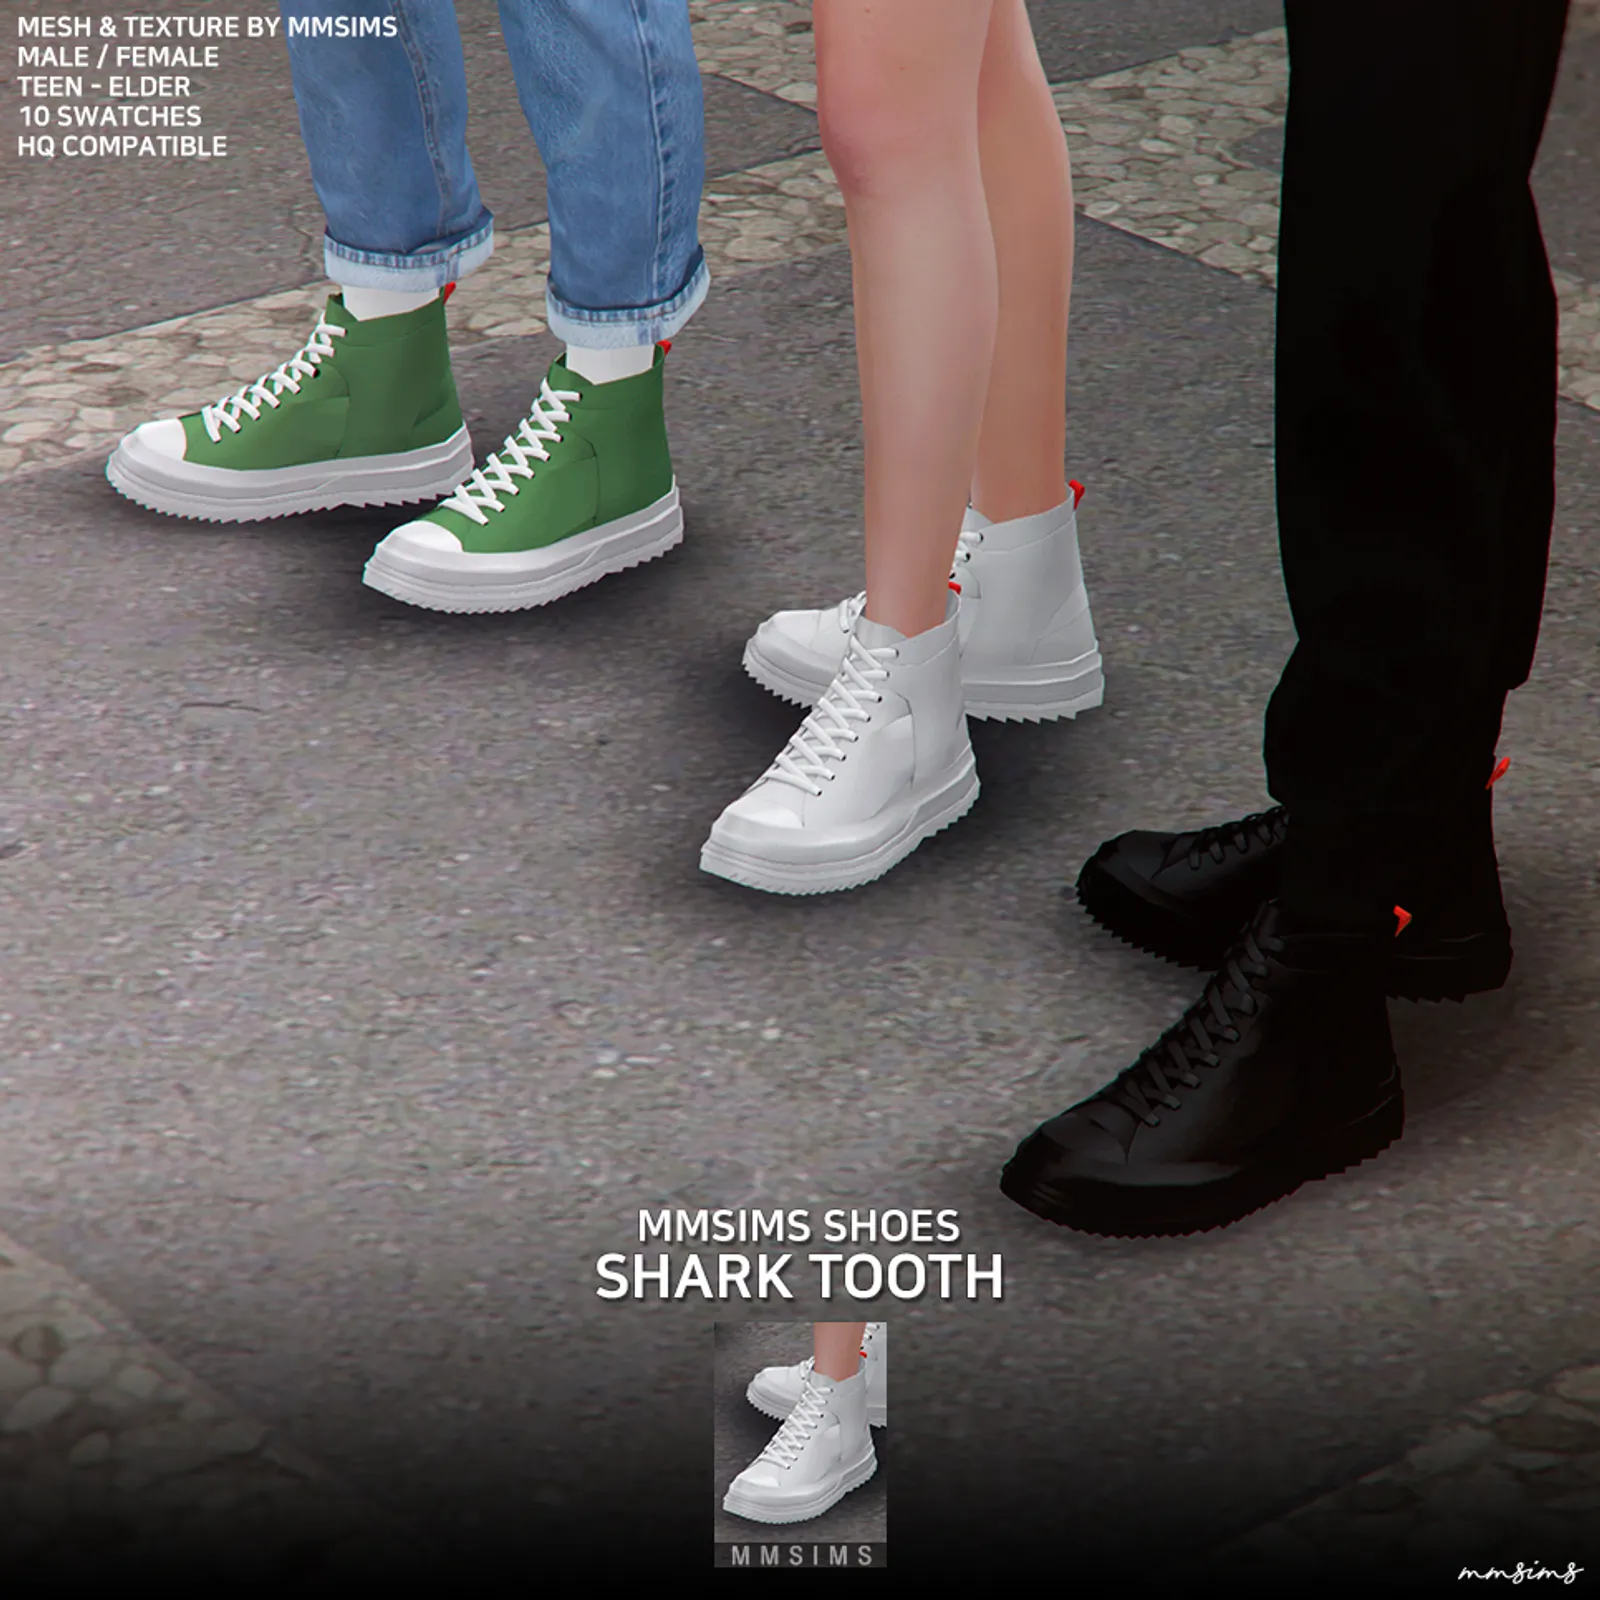 MMSIMS Shark tooth Sneakers